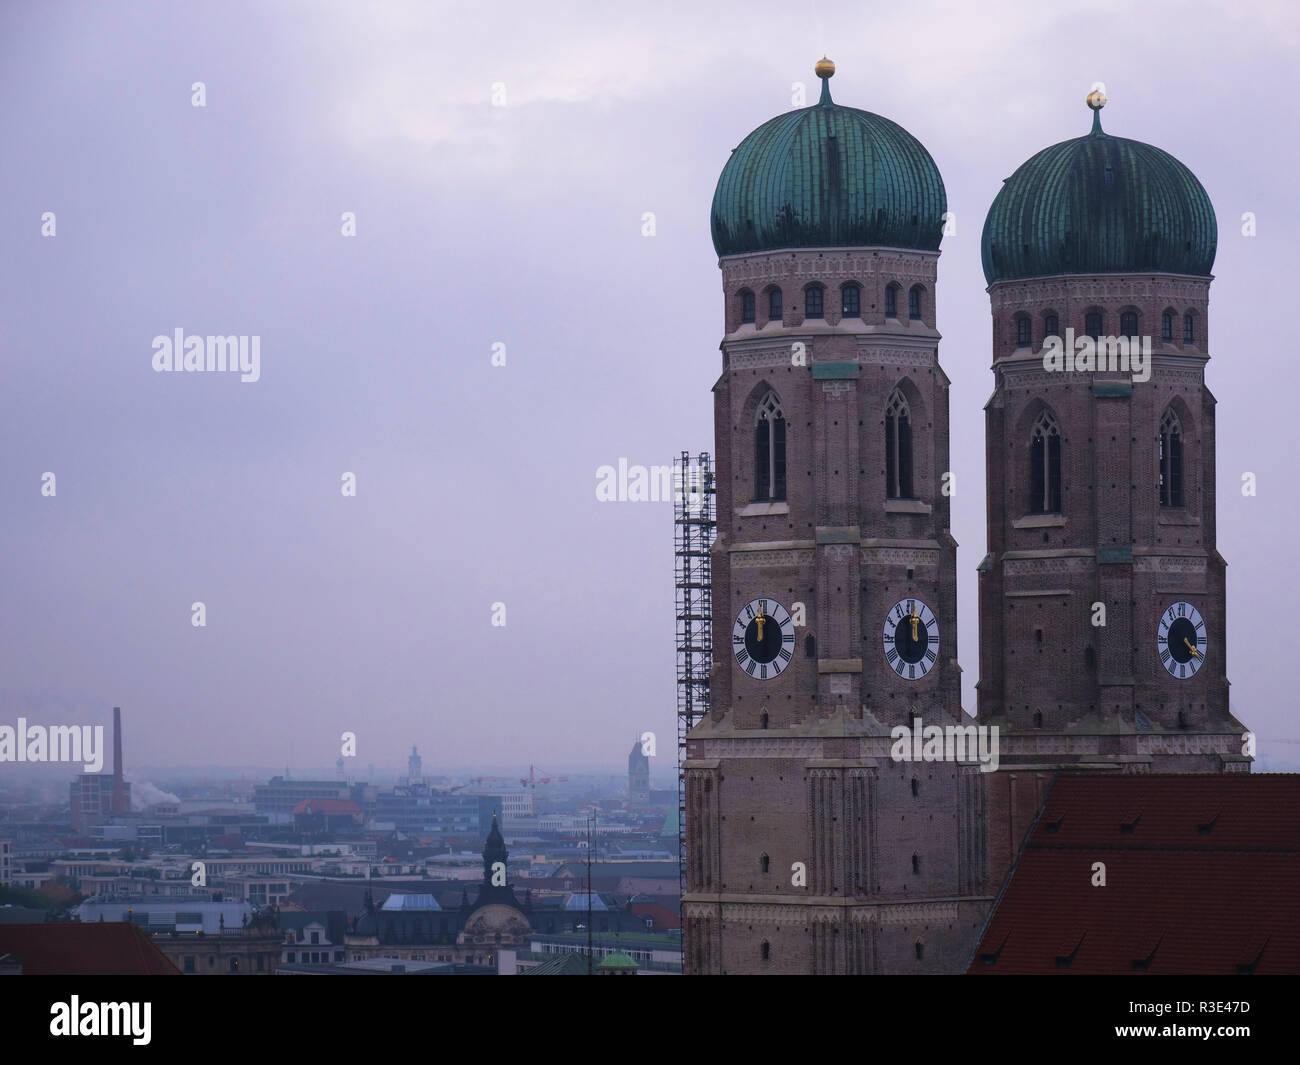 Fraunkirche cathedral or church in Munich, Germany Stock Photo